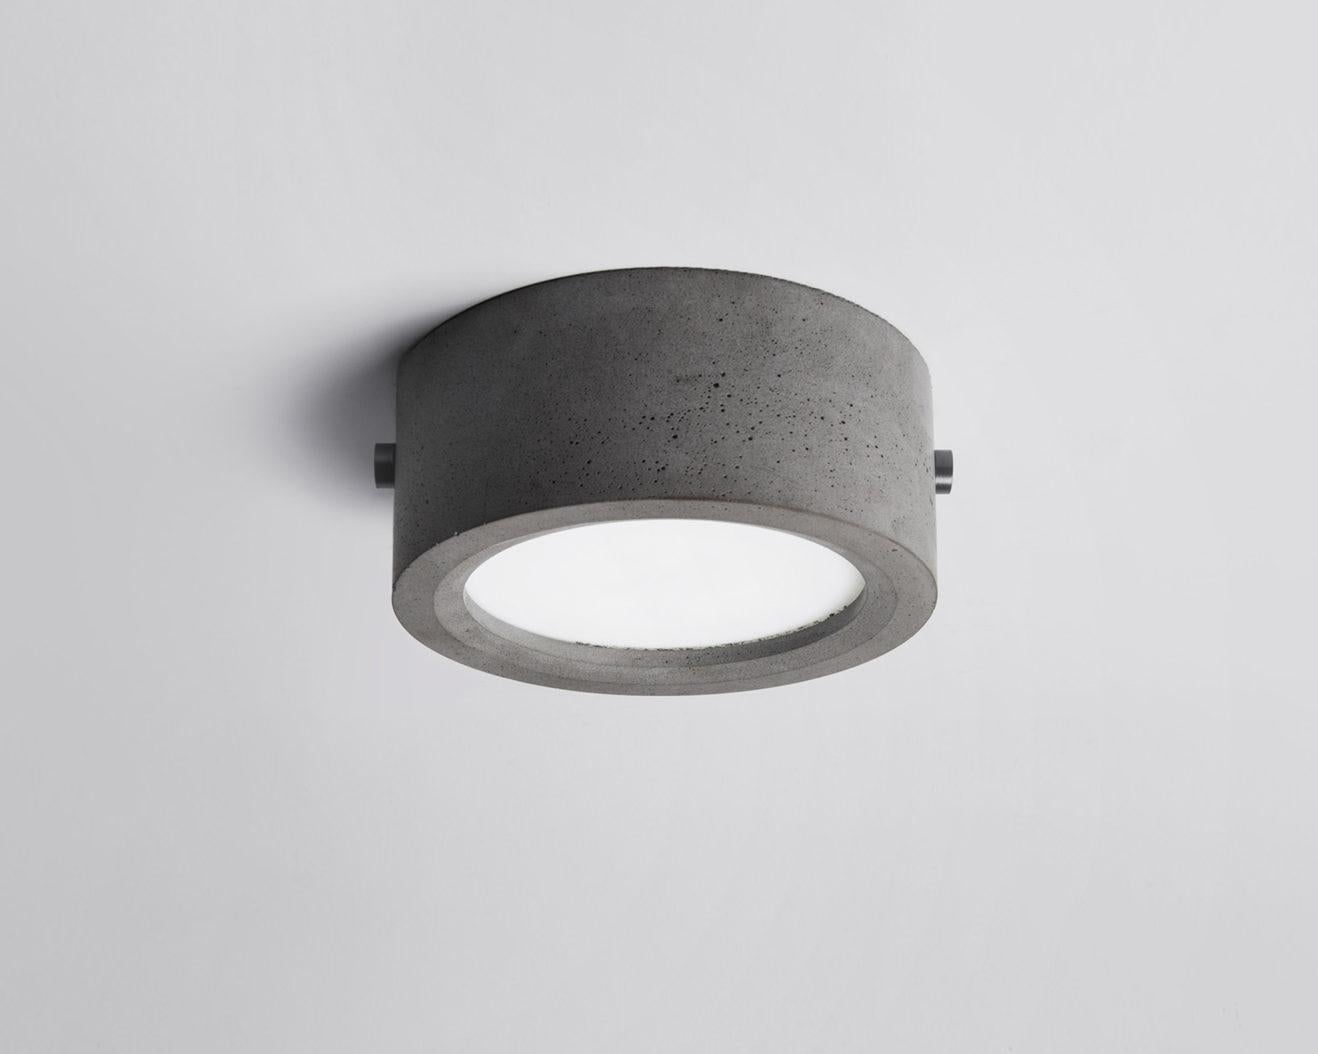 'Huan' concrete lighting designed by Cantonese studio Bentu Design

Dimensions: Ø13.8 x 6 cm
Light source: LED Panel 10W 85-240V 1000LM (US compatibility)


Bentu Design's furniture derives its uniqueness from the simplicity of its forms and